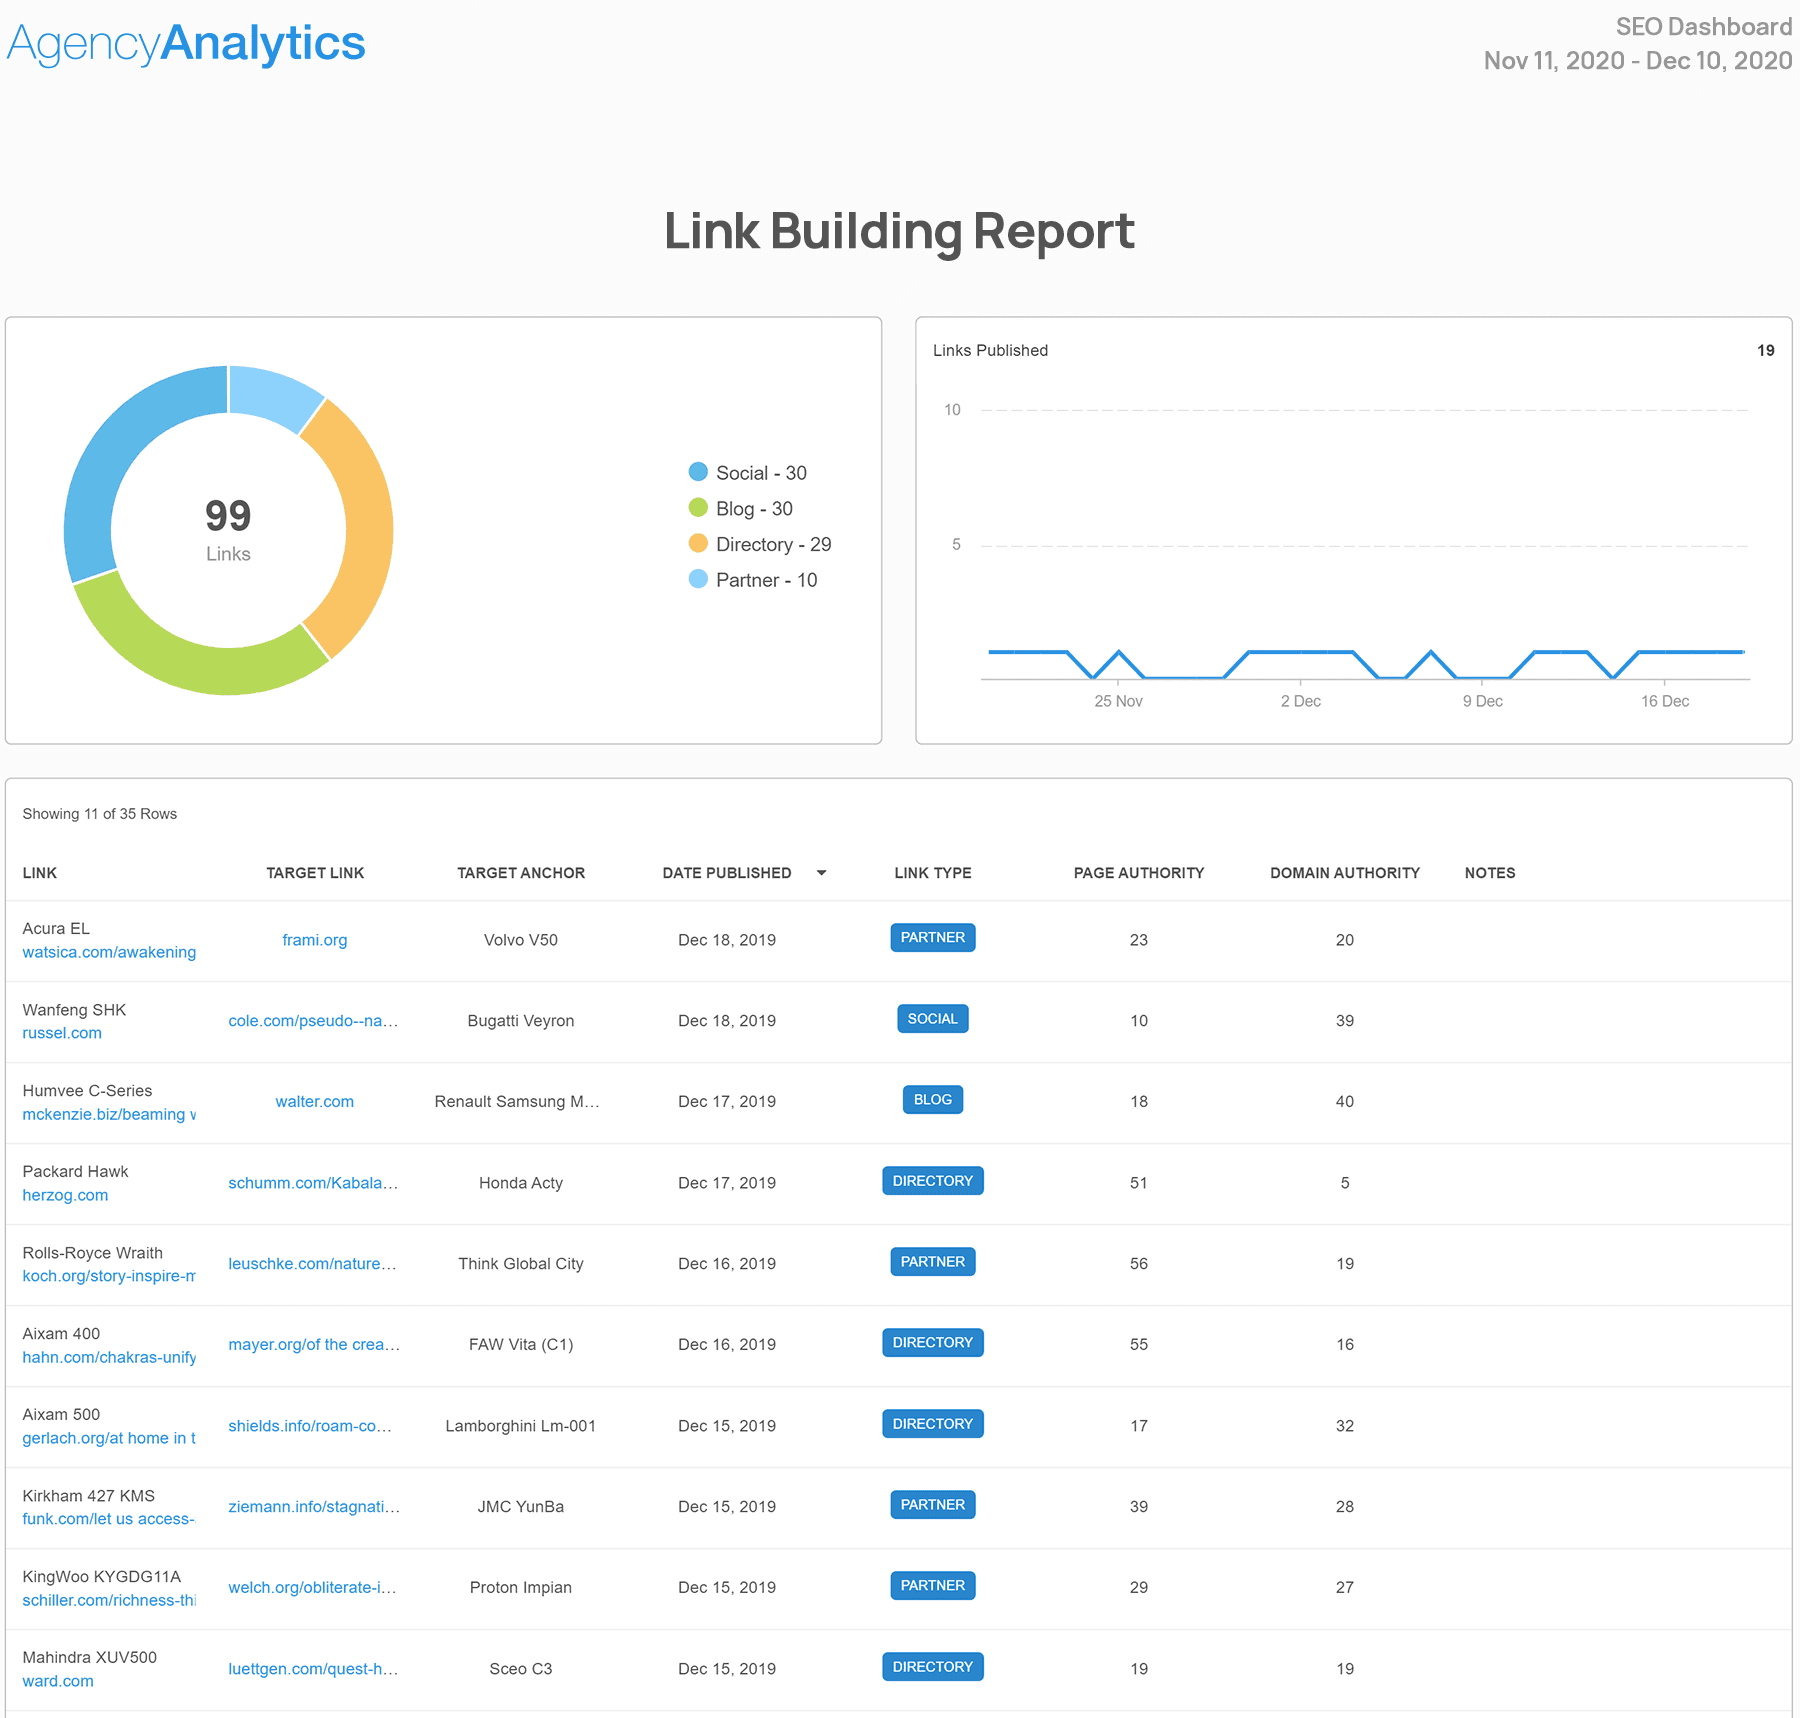 Link-building report templates and tools: AgencyAnalytics